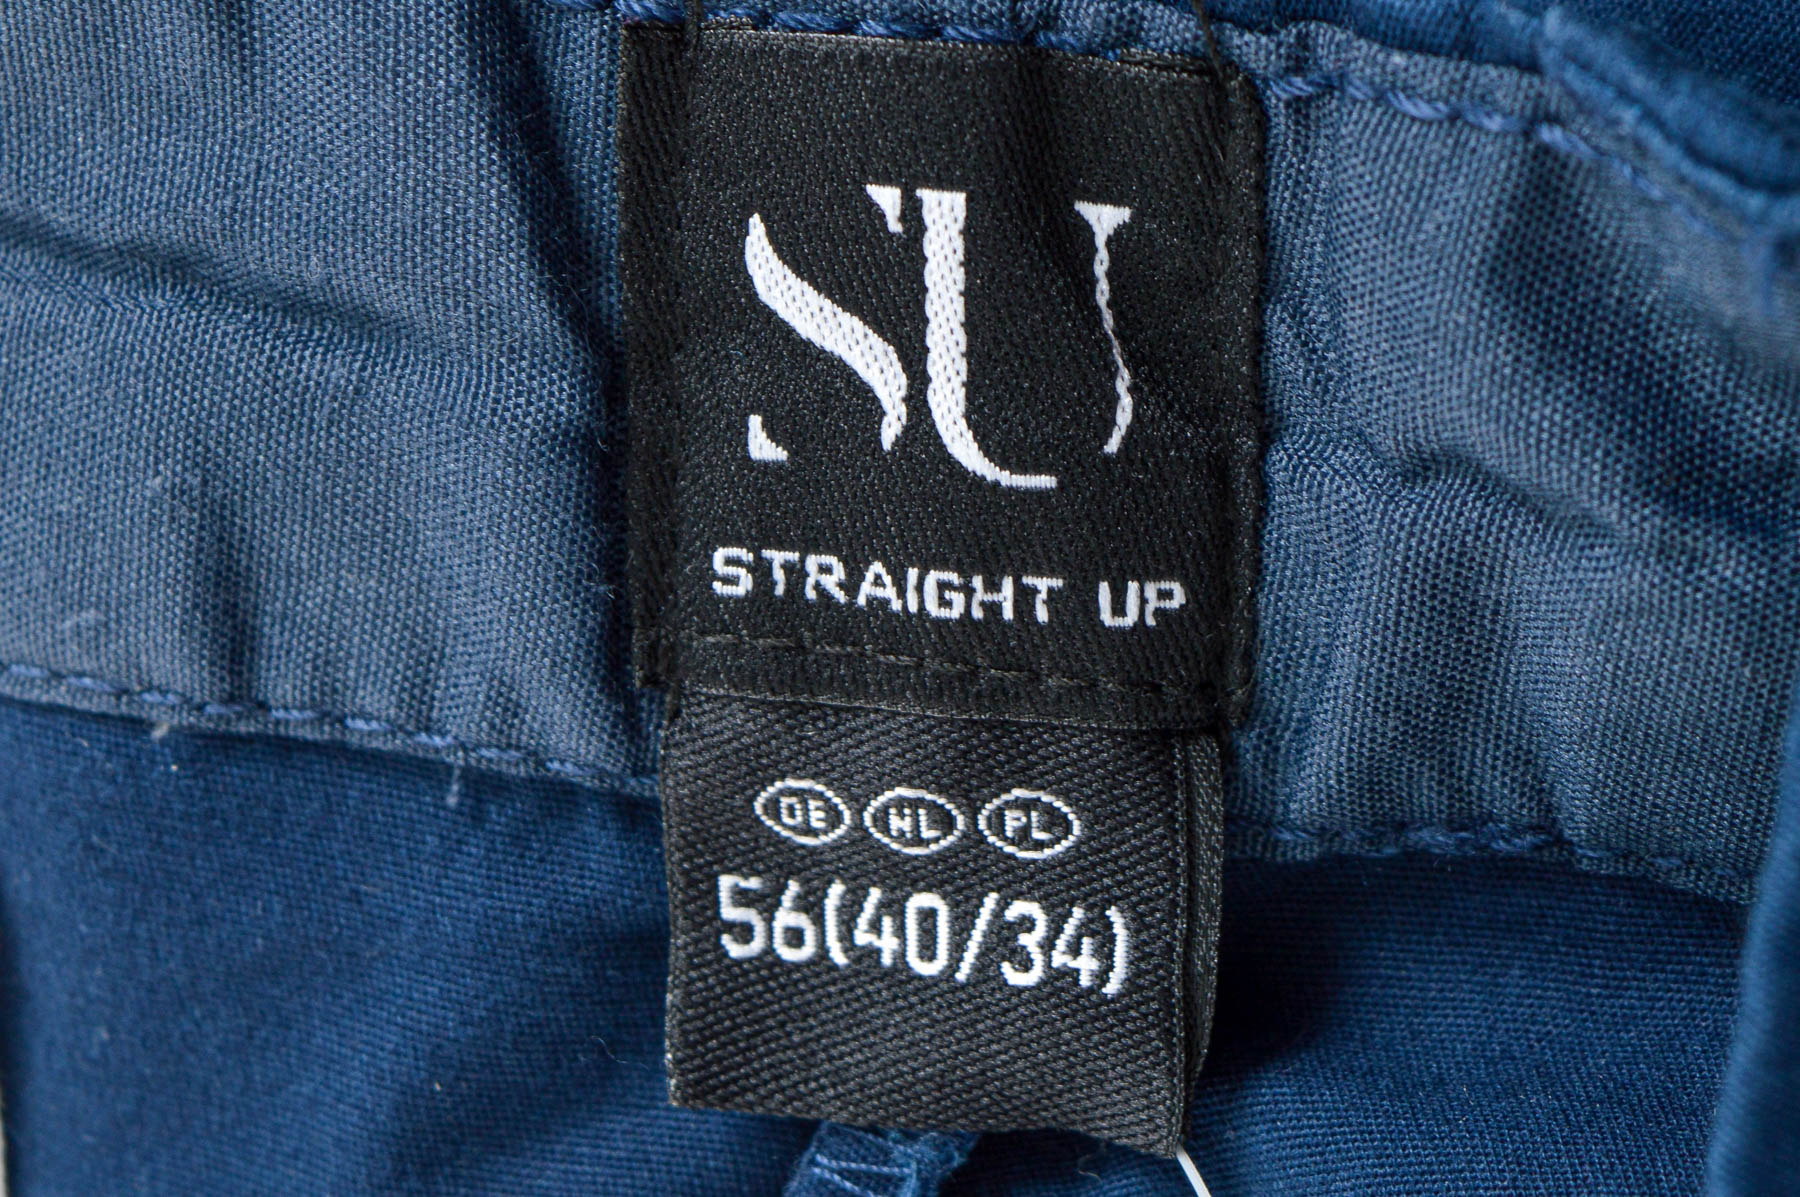 Men's trousers - Straight Up - 2